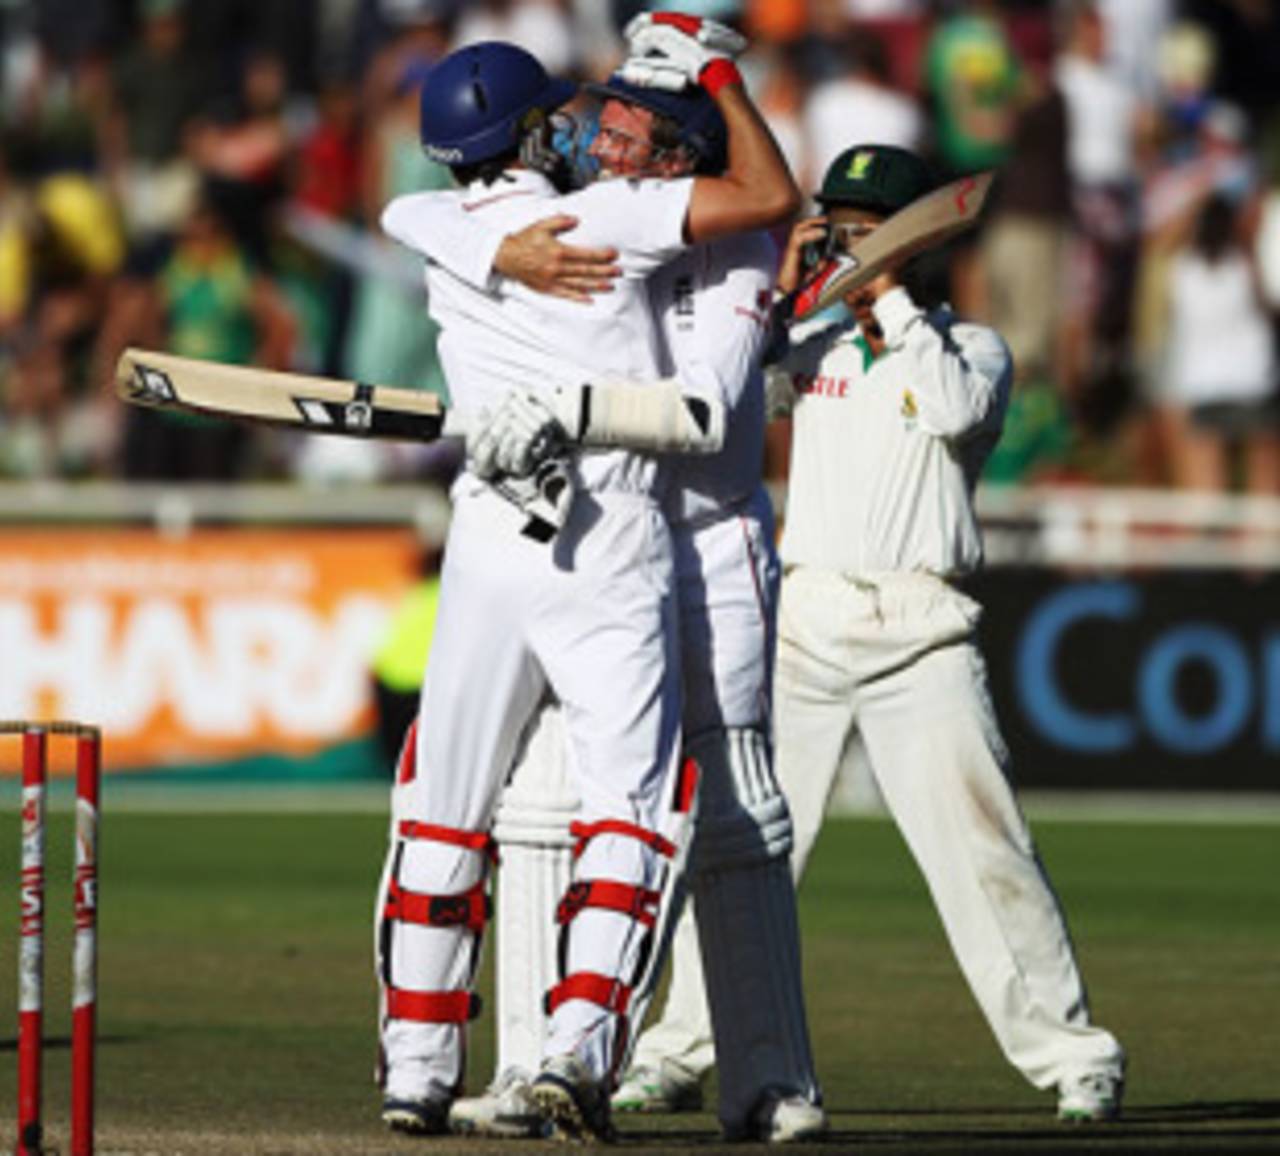 Graham Onions and Graeme Swann embrace after seeing out 17 balls to save England the Test, England v South Africa, 3rd Test, Cape Town, January 7, 2010